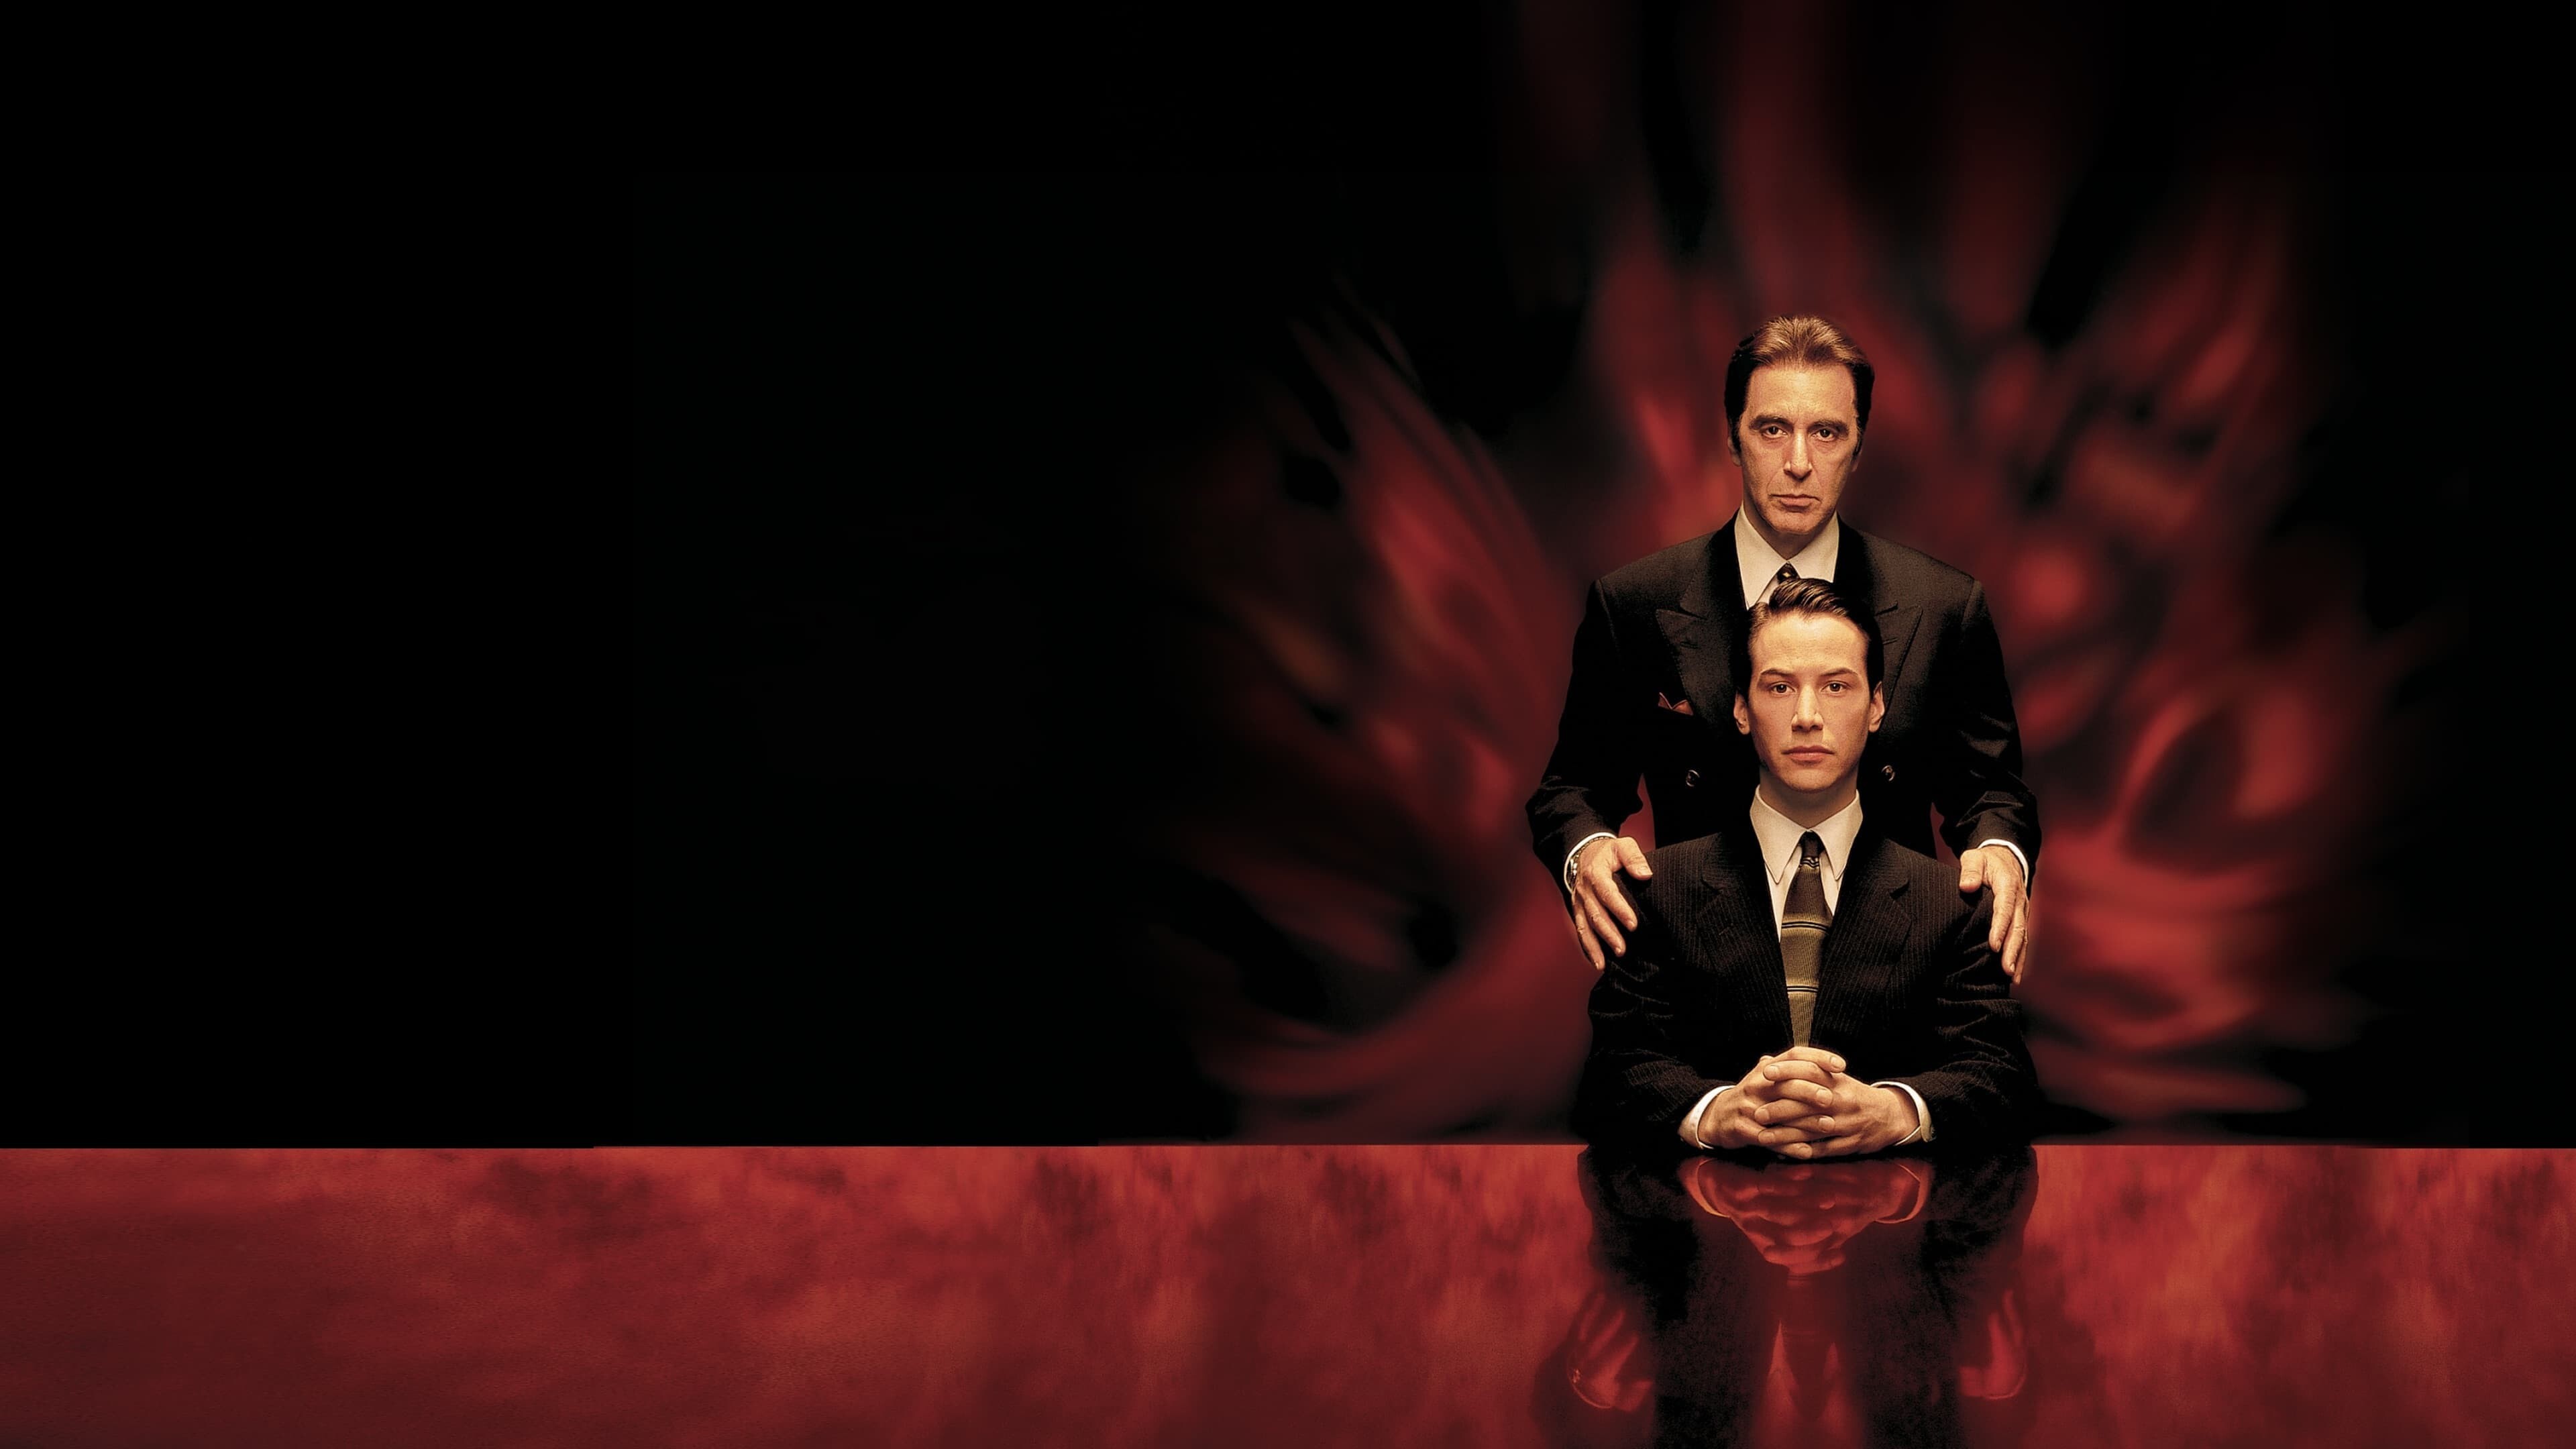 The Devil's Advocate (Movie): A 1997 American supernatural horror film directed by Taylor Hackford. 3840x2160 4K Background.